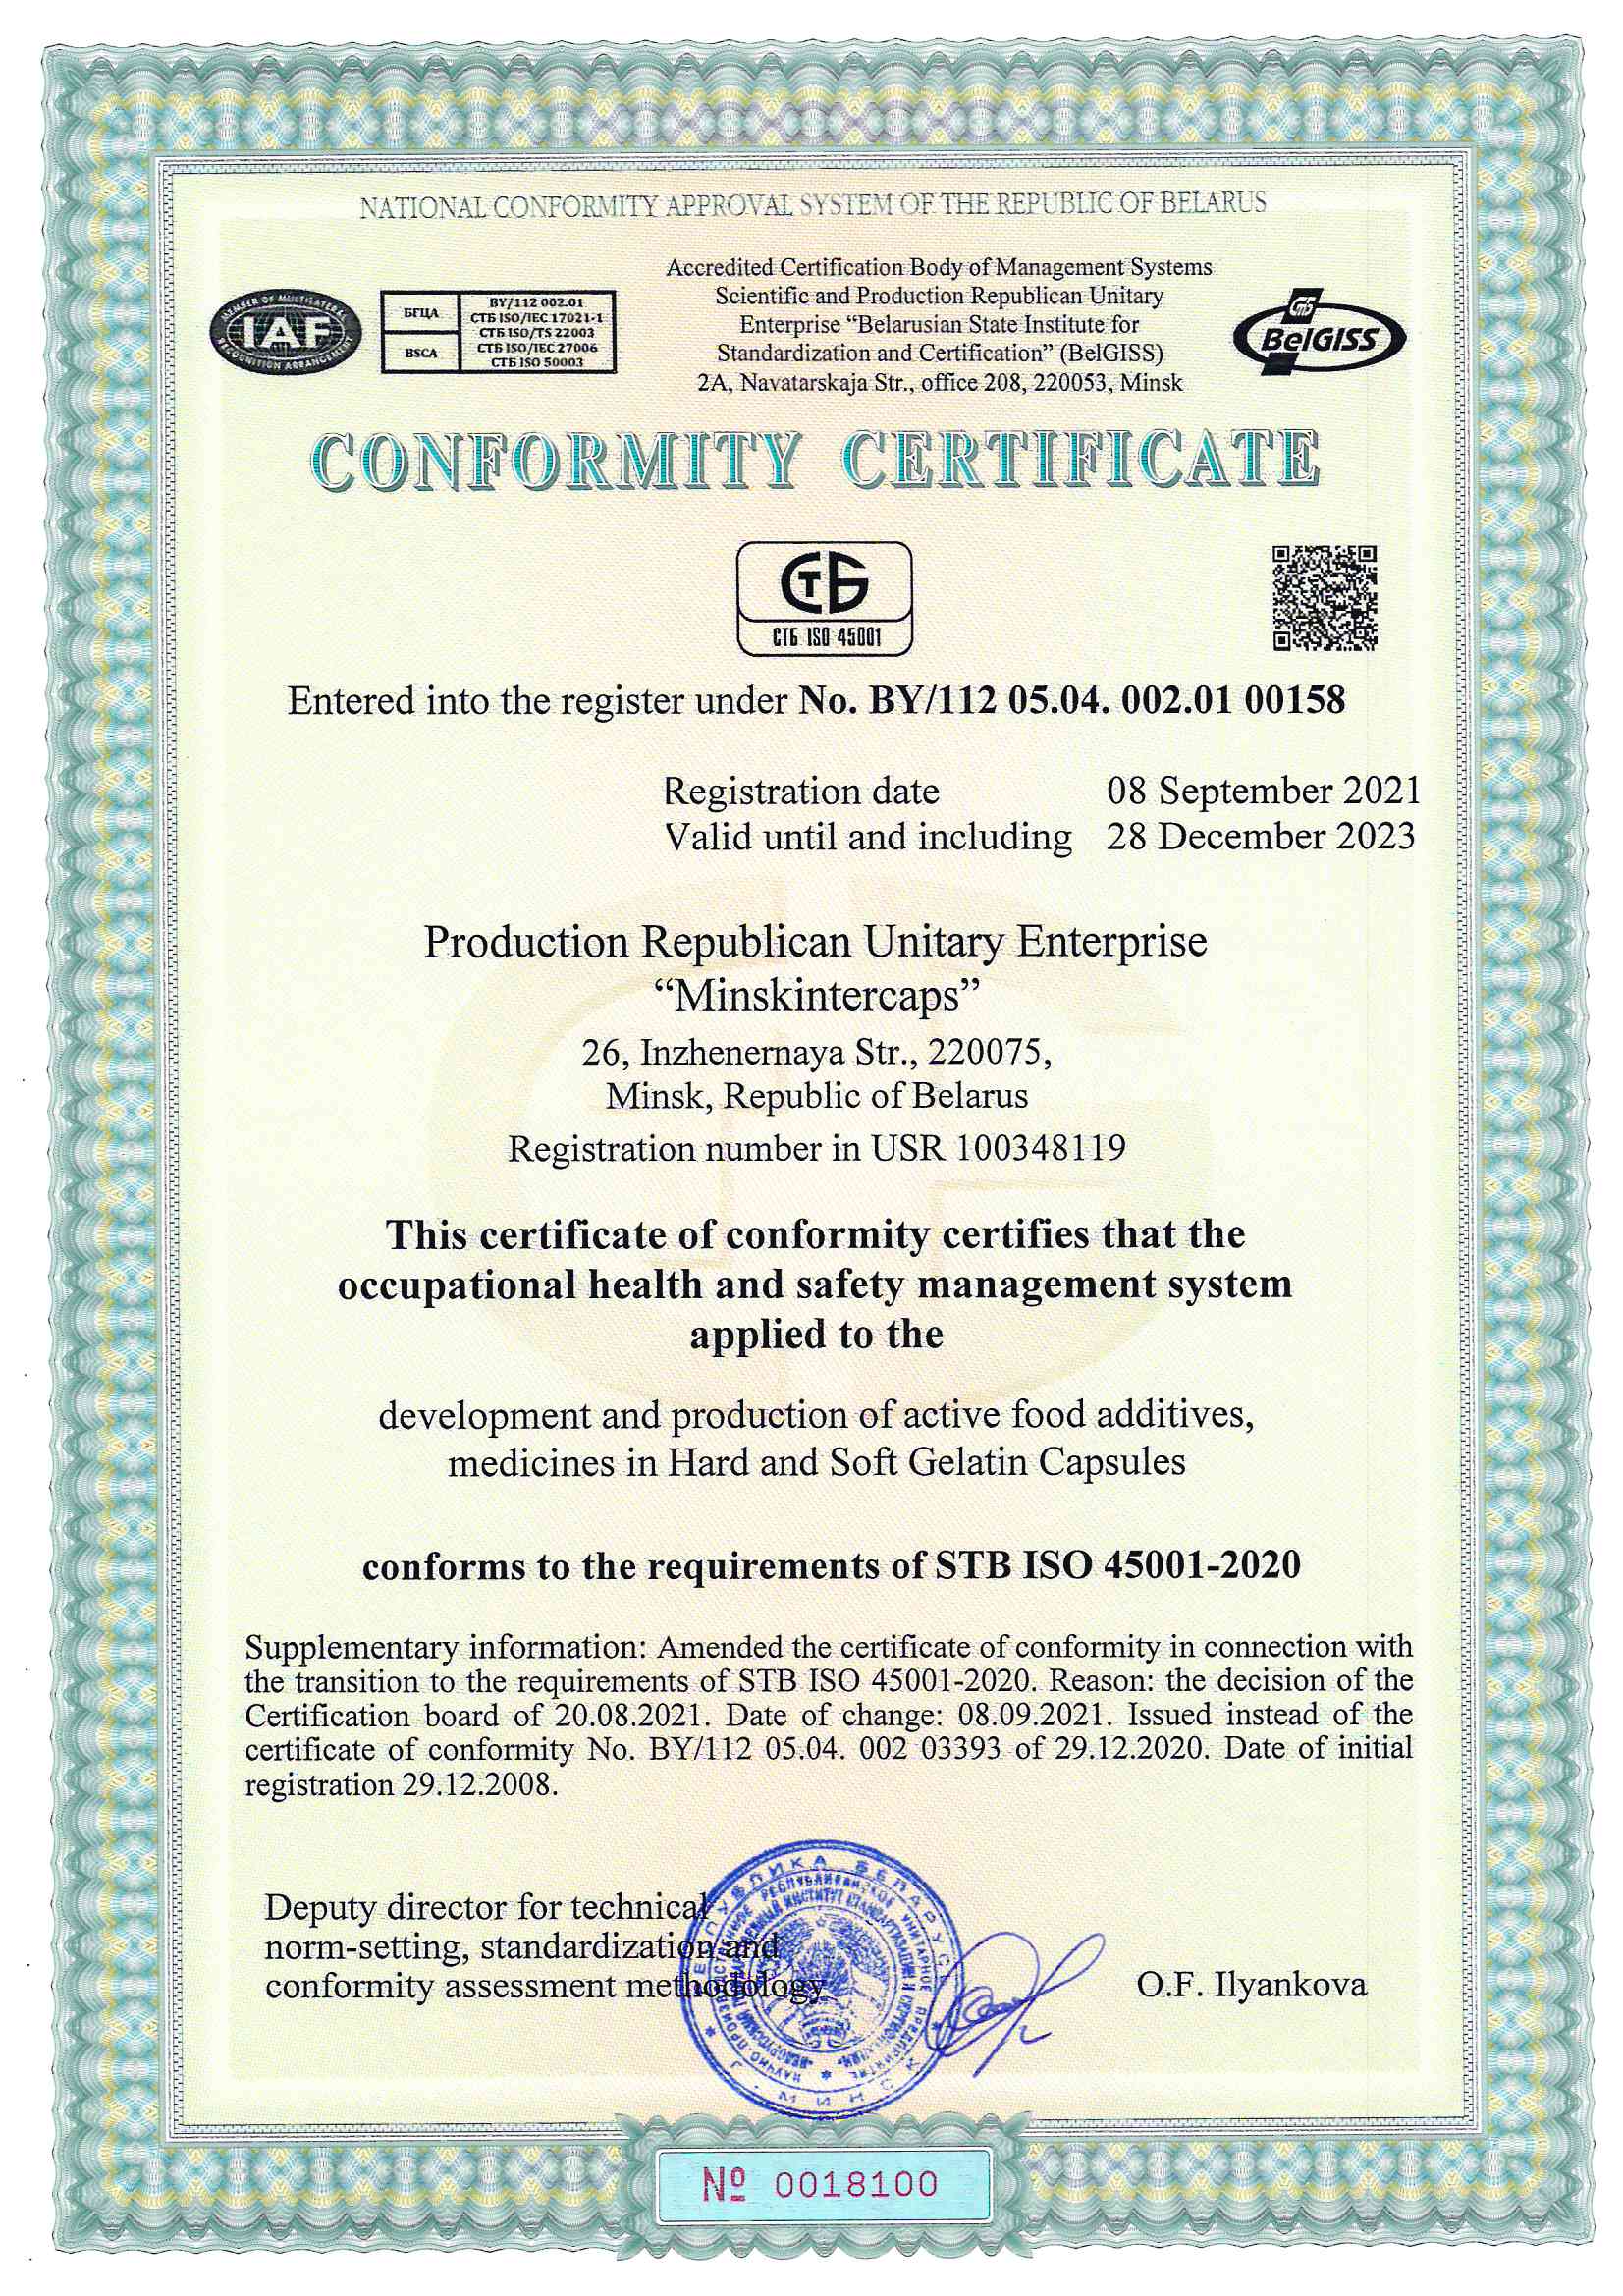 Conformity certificate requirements of STB 45001-2020